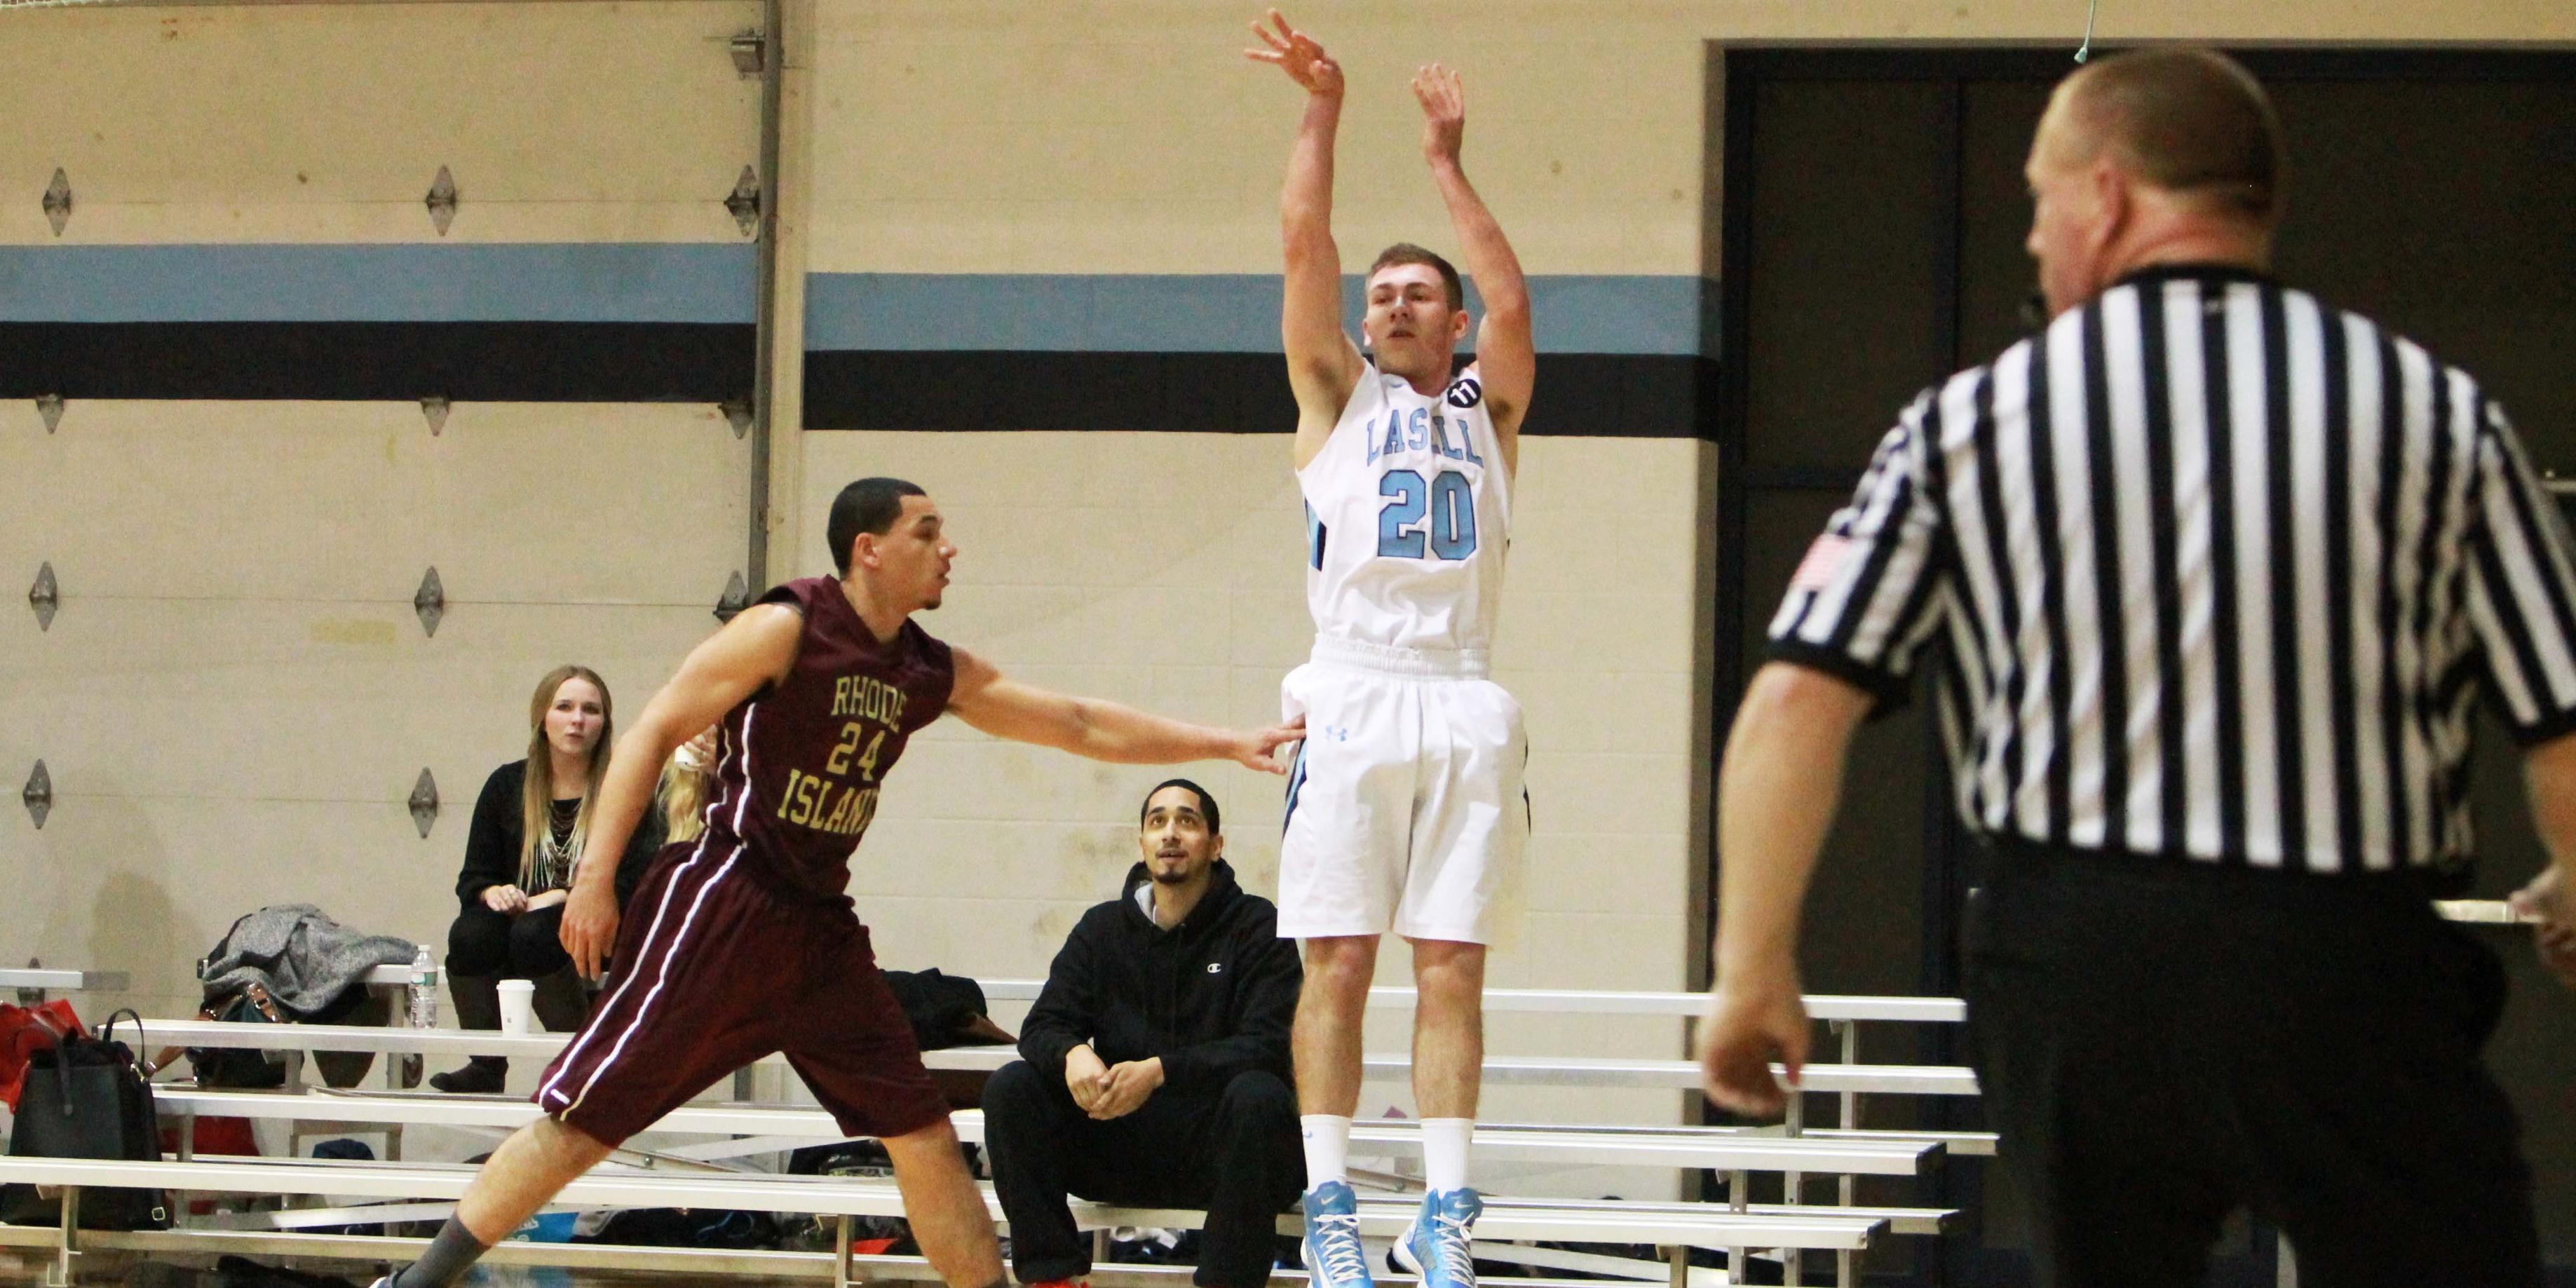 Lasers Clinch Men's Basketball GNAC Victory Over Suffolk University 73-63